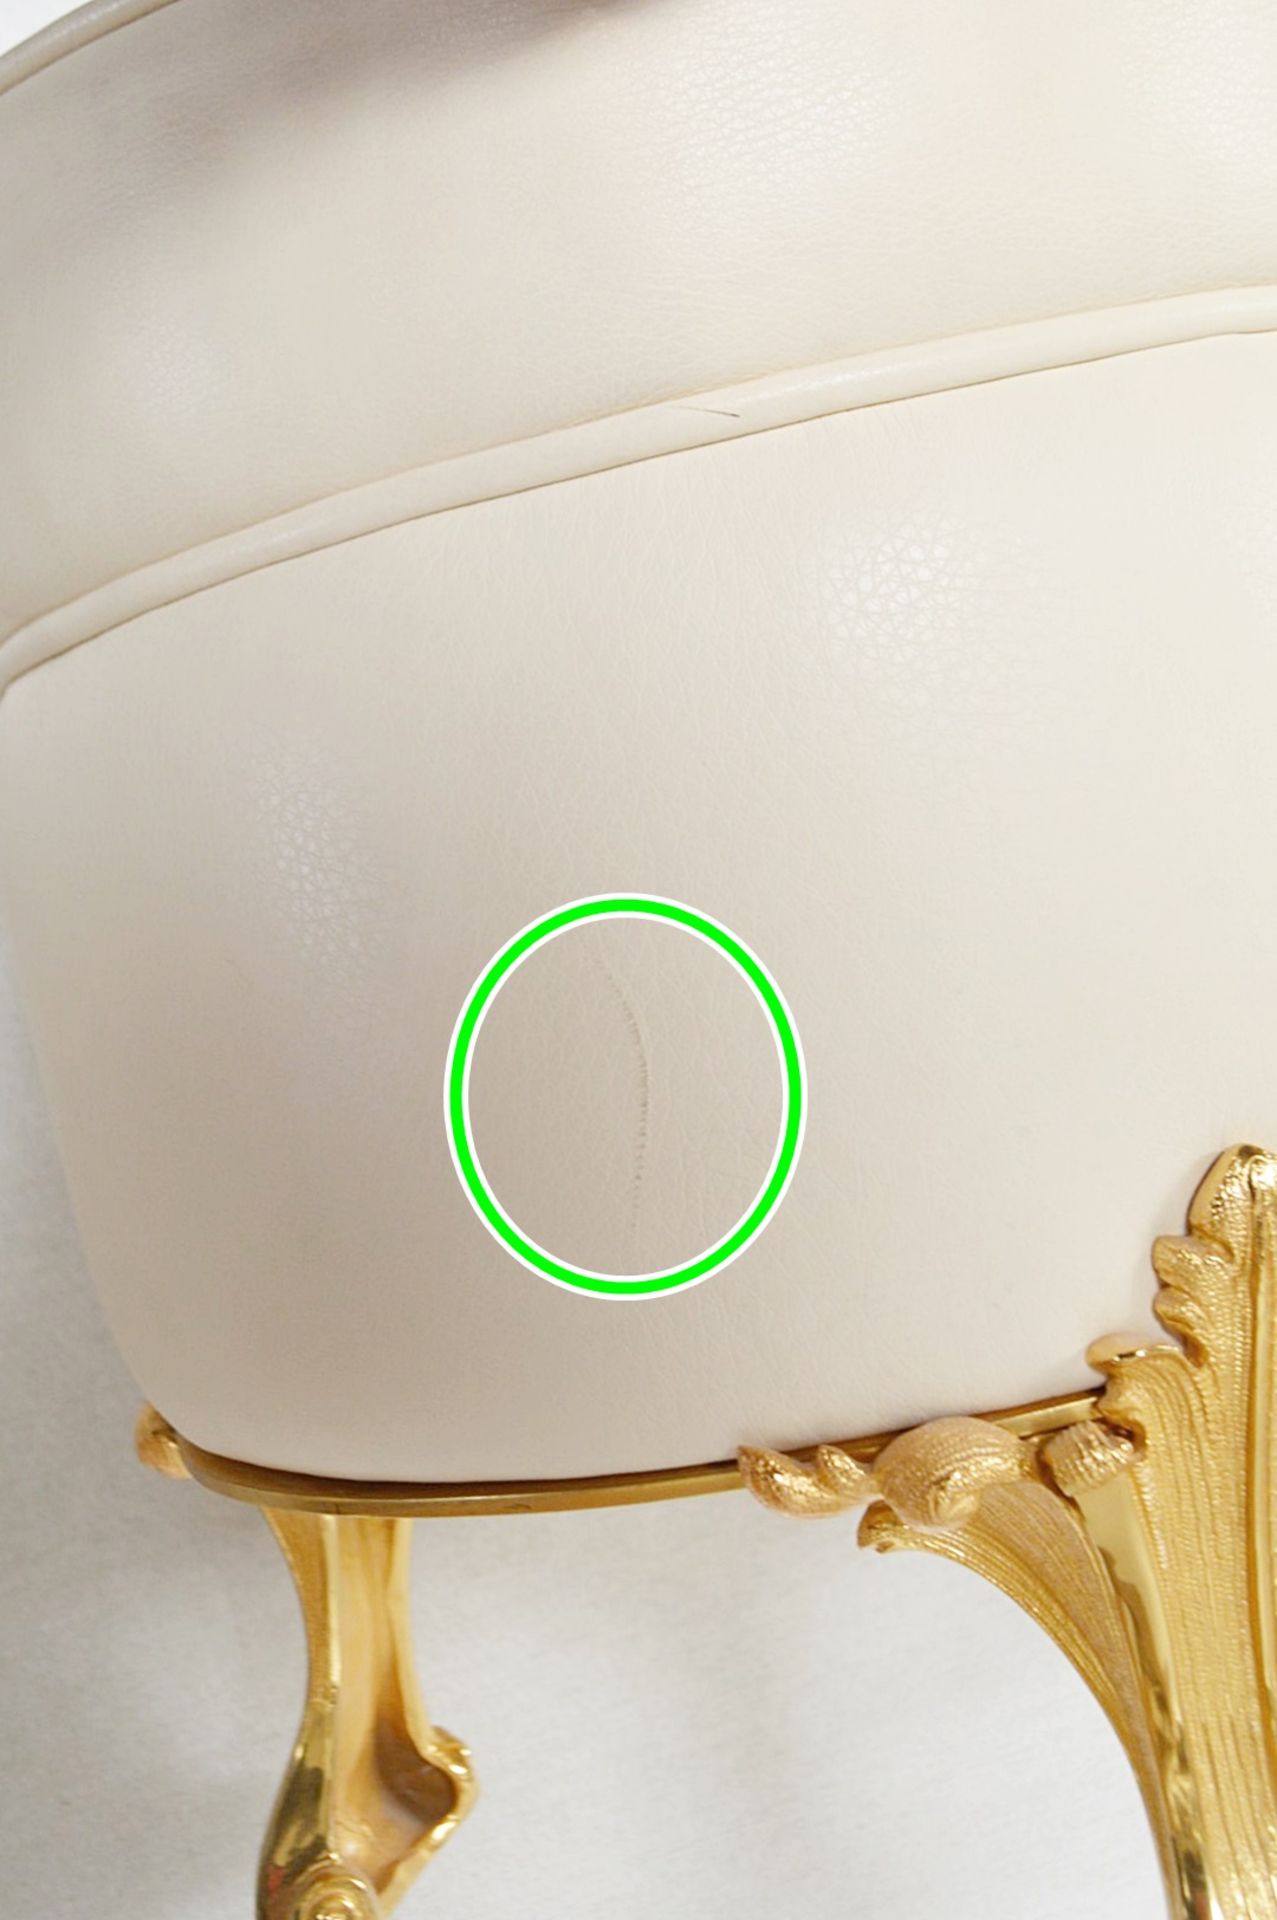 1 x BALDI Luxury Leather Upholstered Stool In Cream With Ornate Claw Feet In Gold - Italian Made - Image 6 of 8